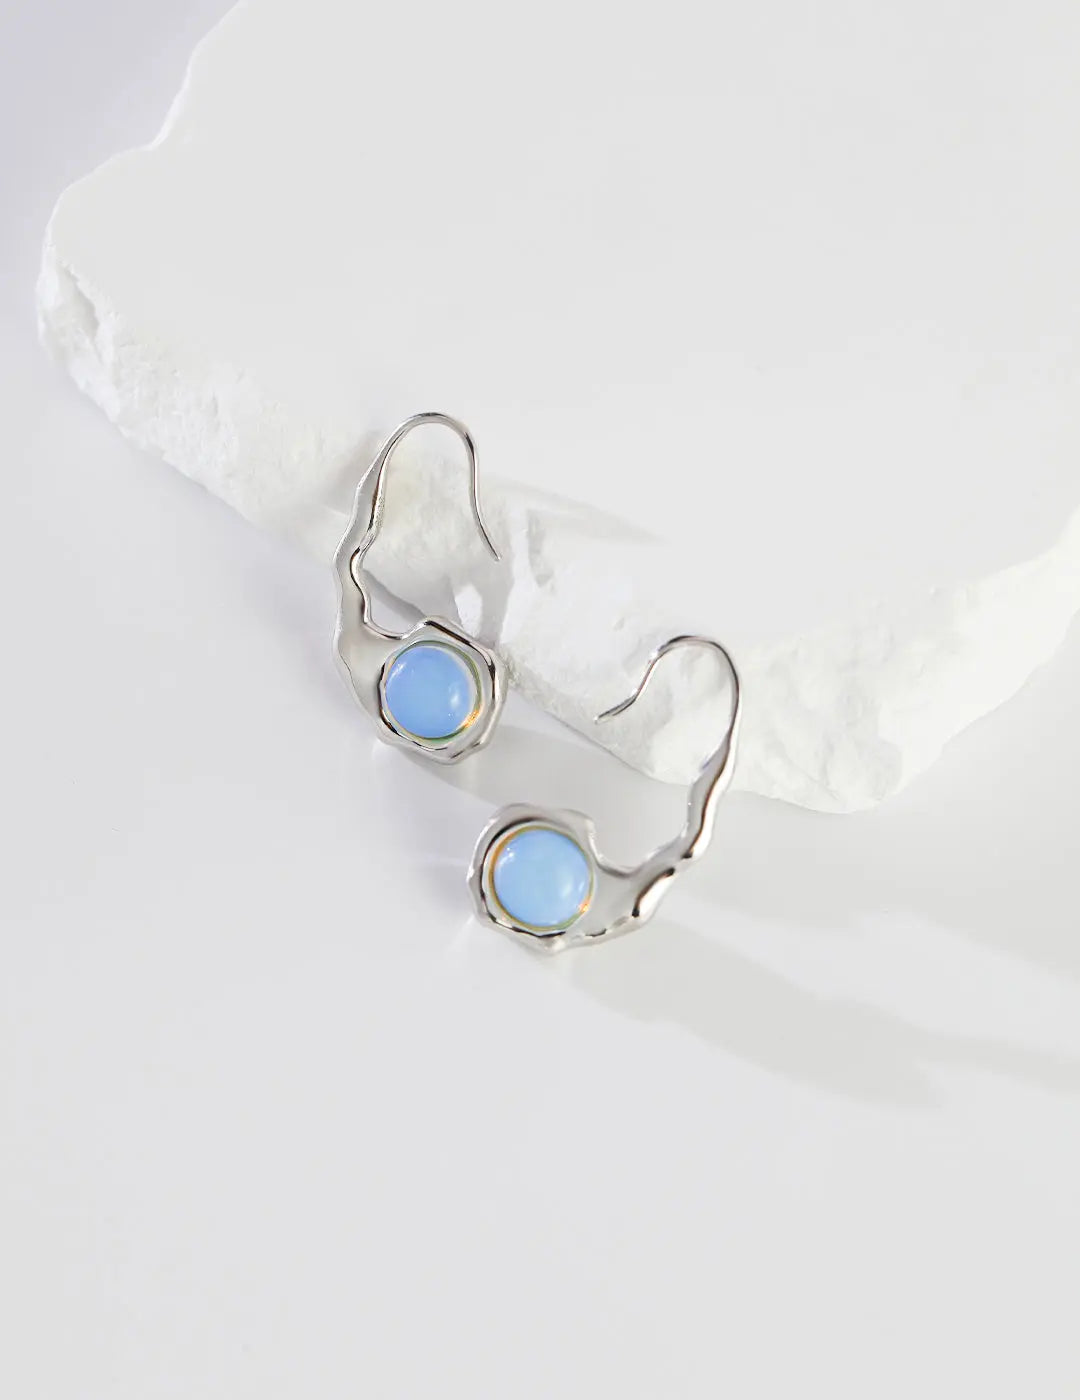 S925 silver earrings with Opal stone Agate Stone 